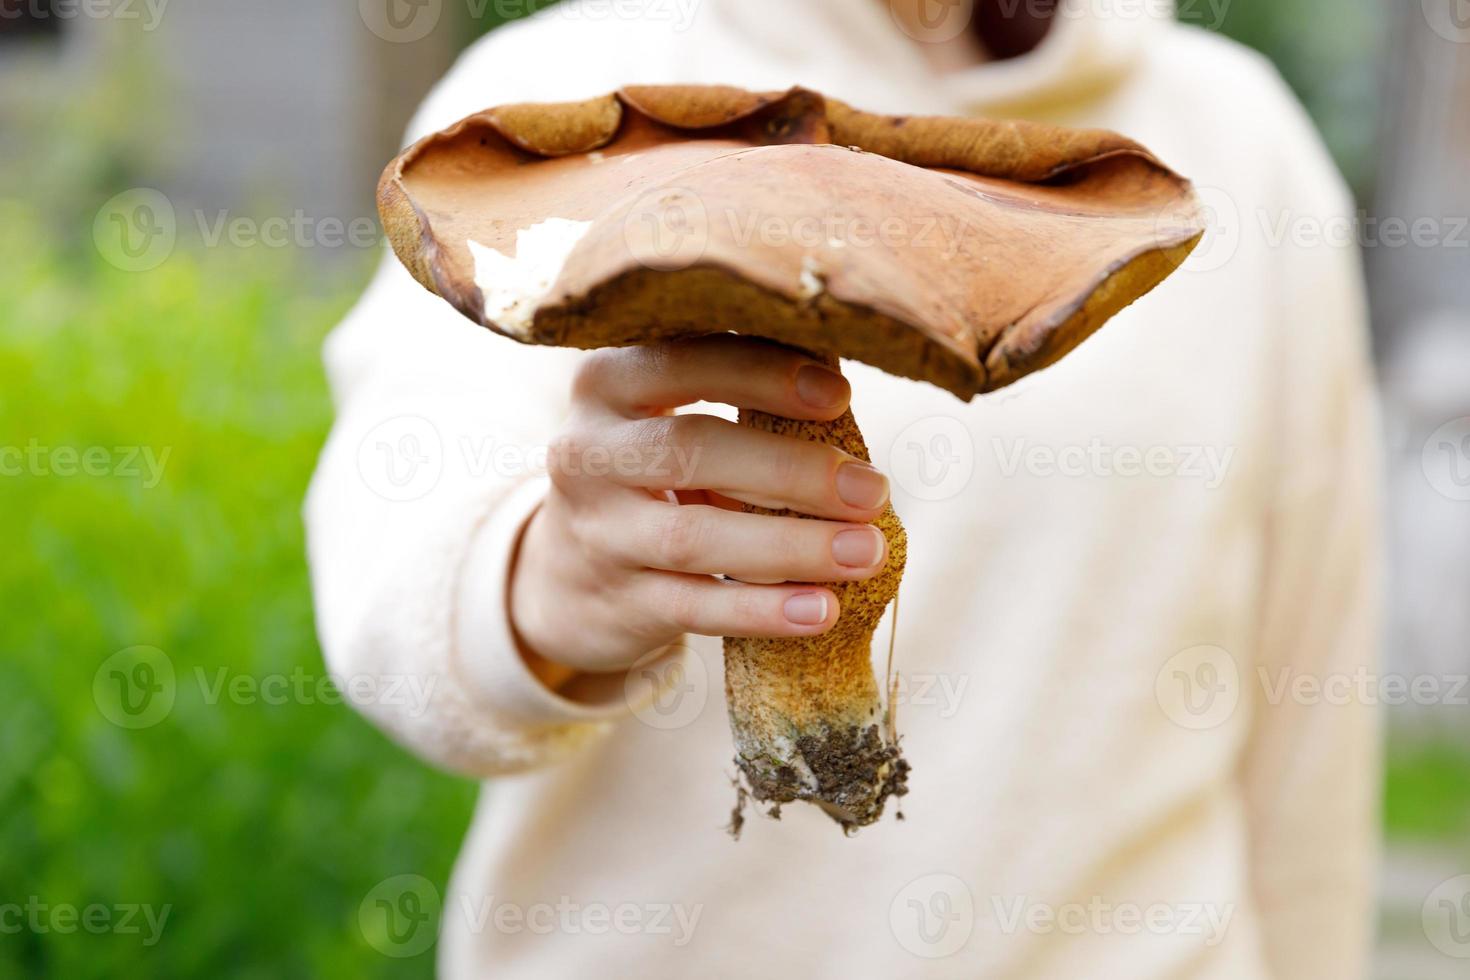 Female hand holding raw edible mushroom with brown cap Penny Bun in autumn forest background. Harvesting picking big ceps mushrooms in natural environment. Cooking delicious organic food concept. photo